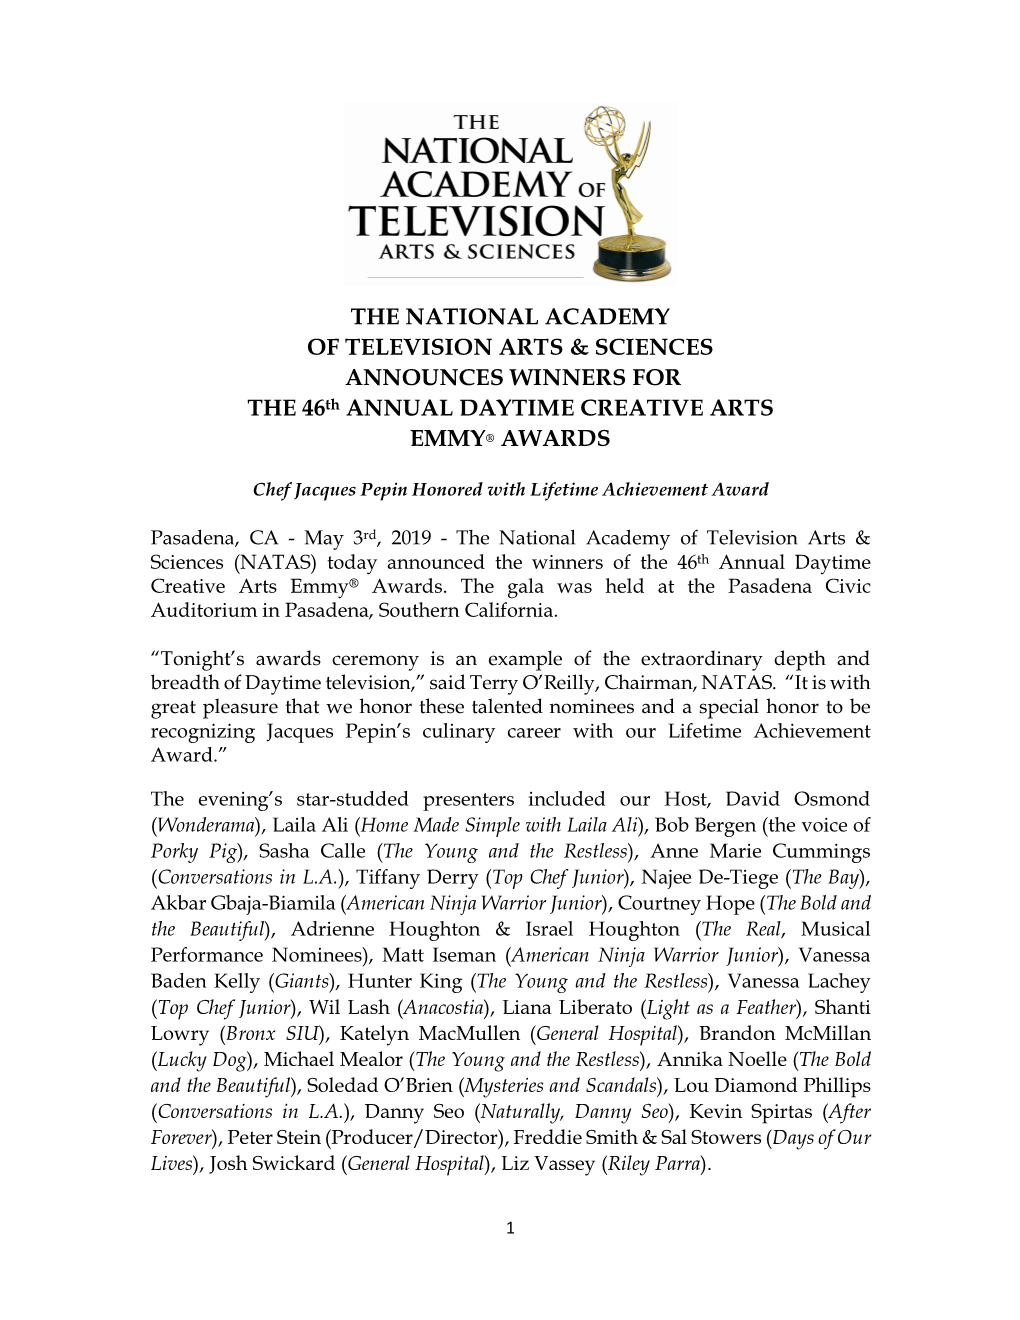 The National Academy of Television Arts & Sciences